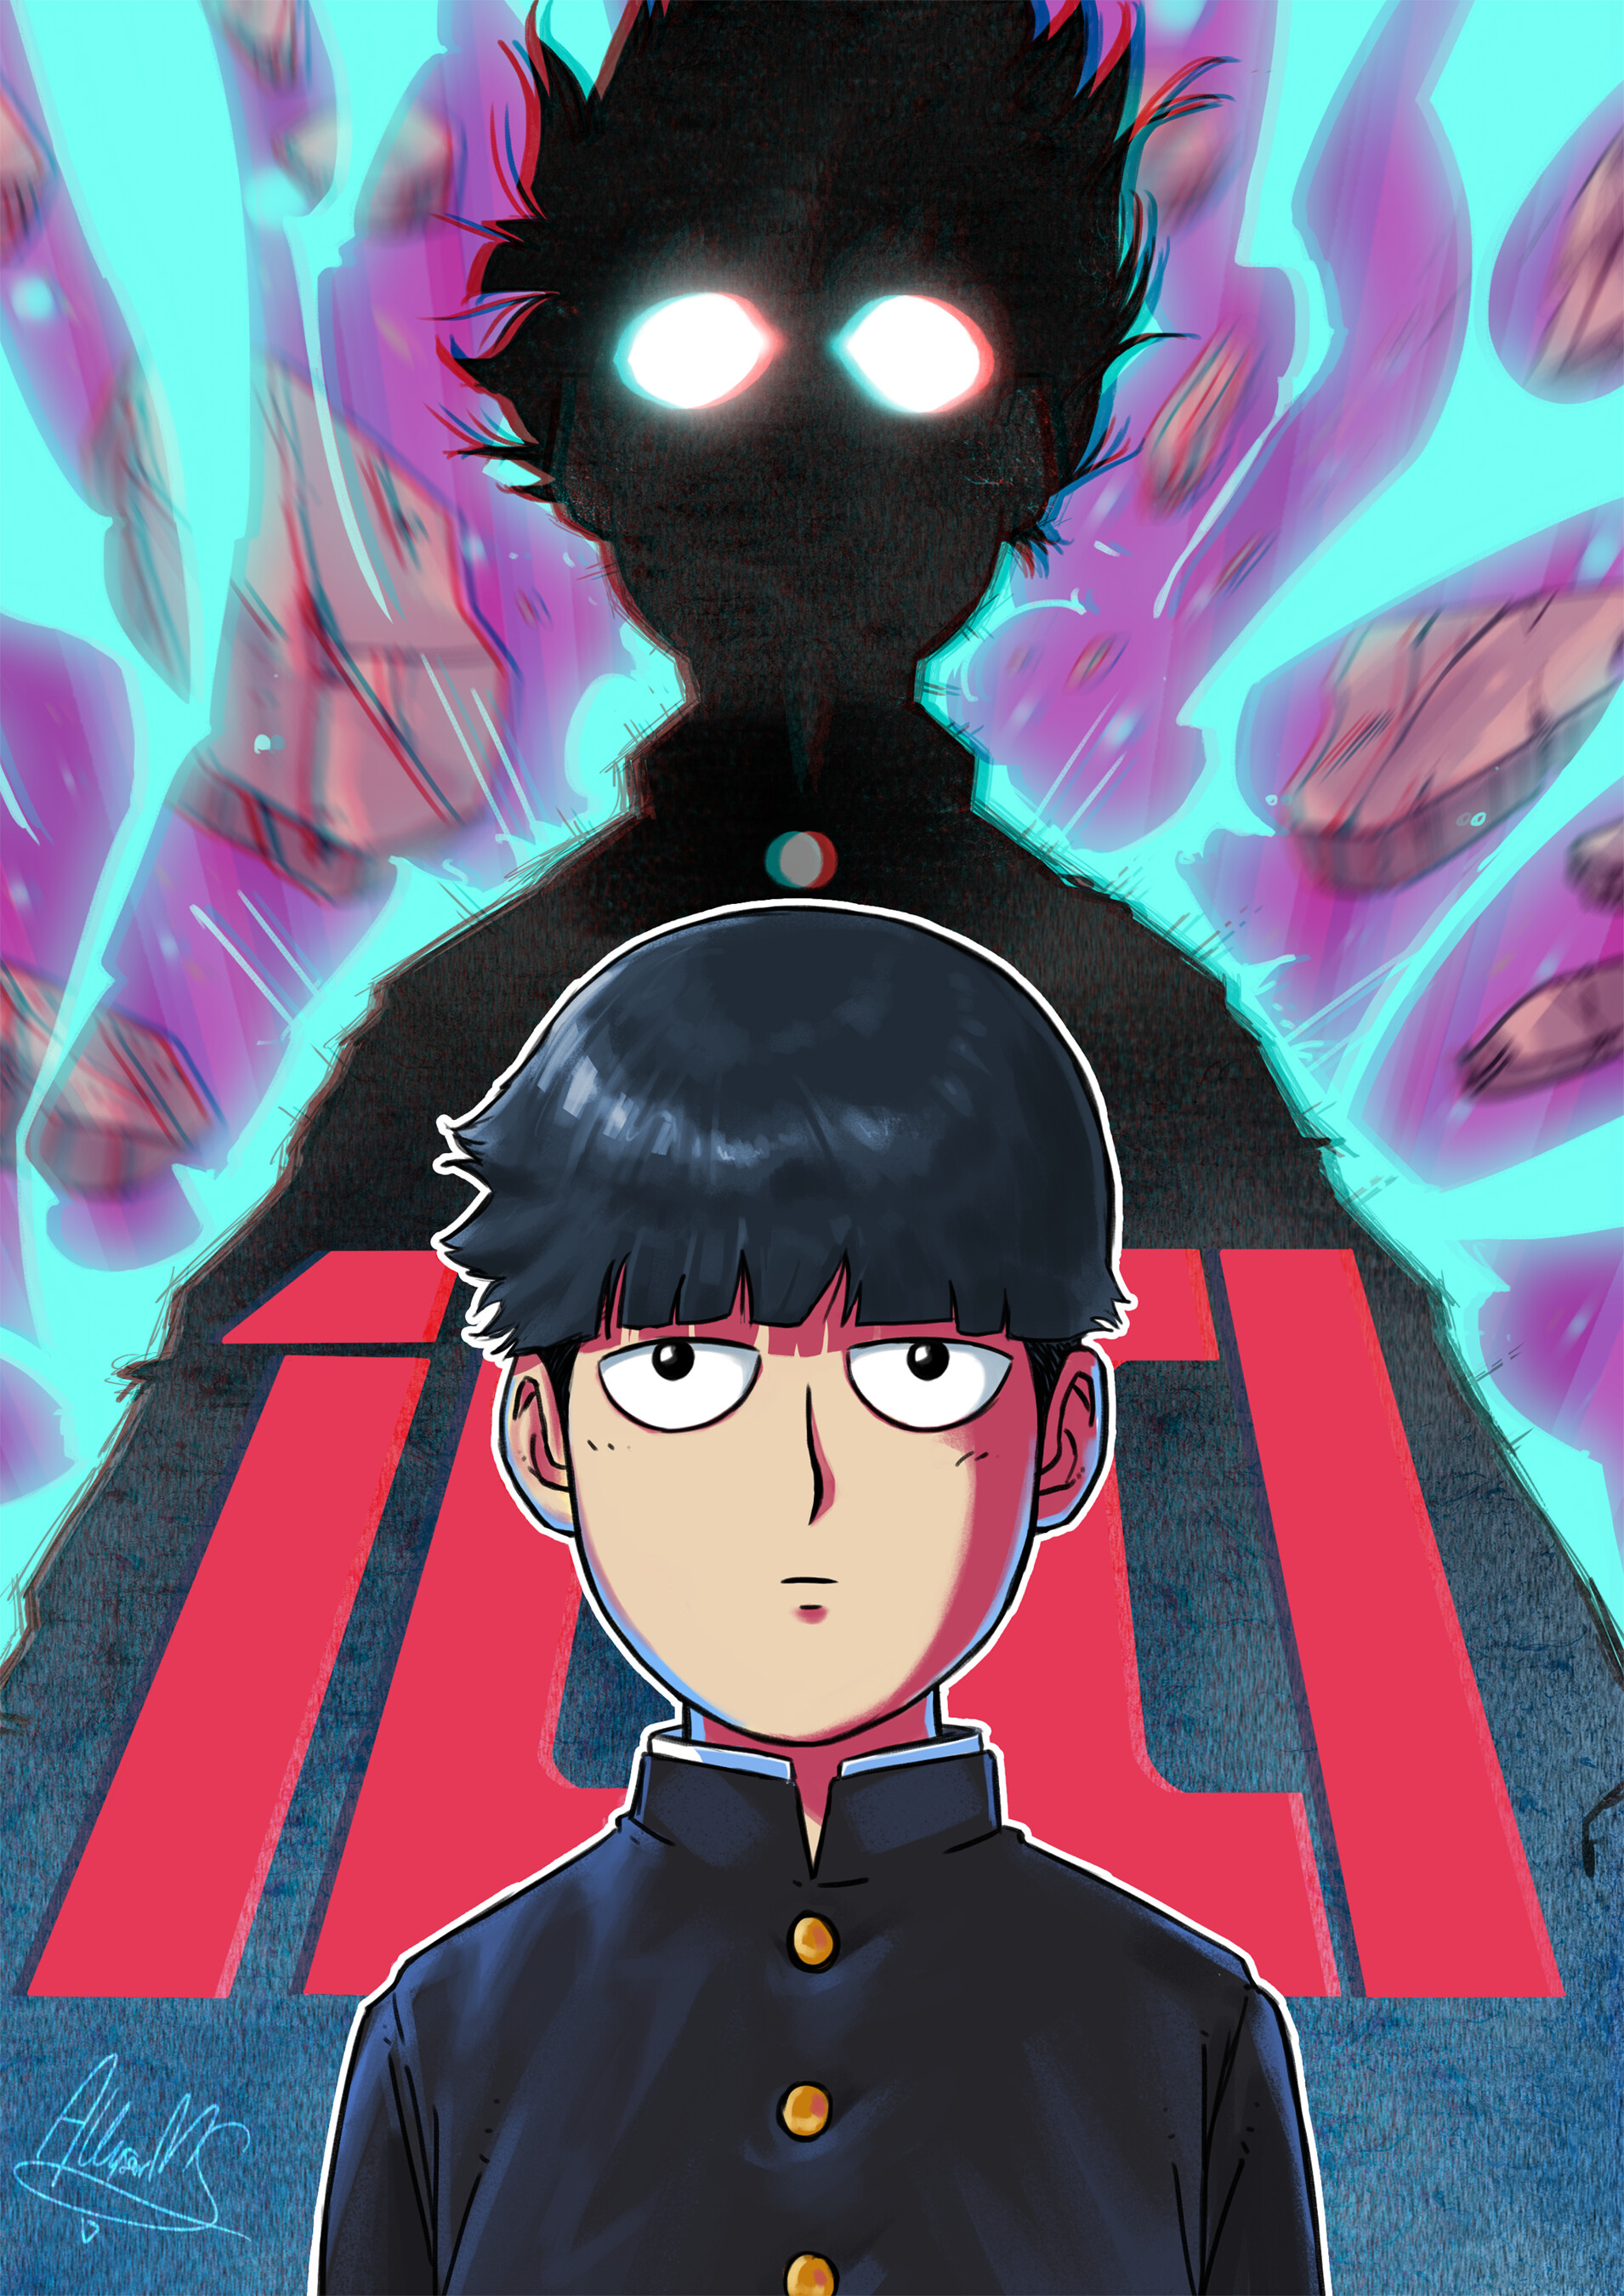 Shigeo Kageyama from Mob Psycho 100. Prints are available on my